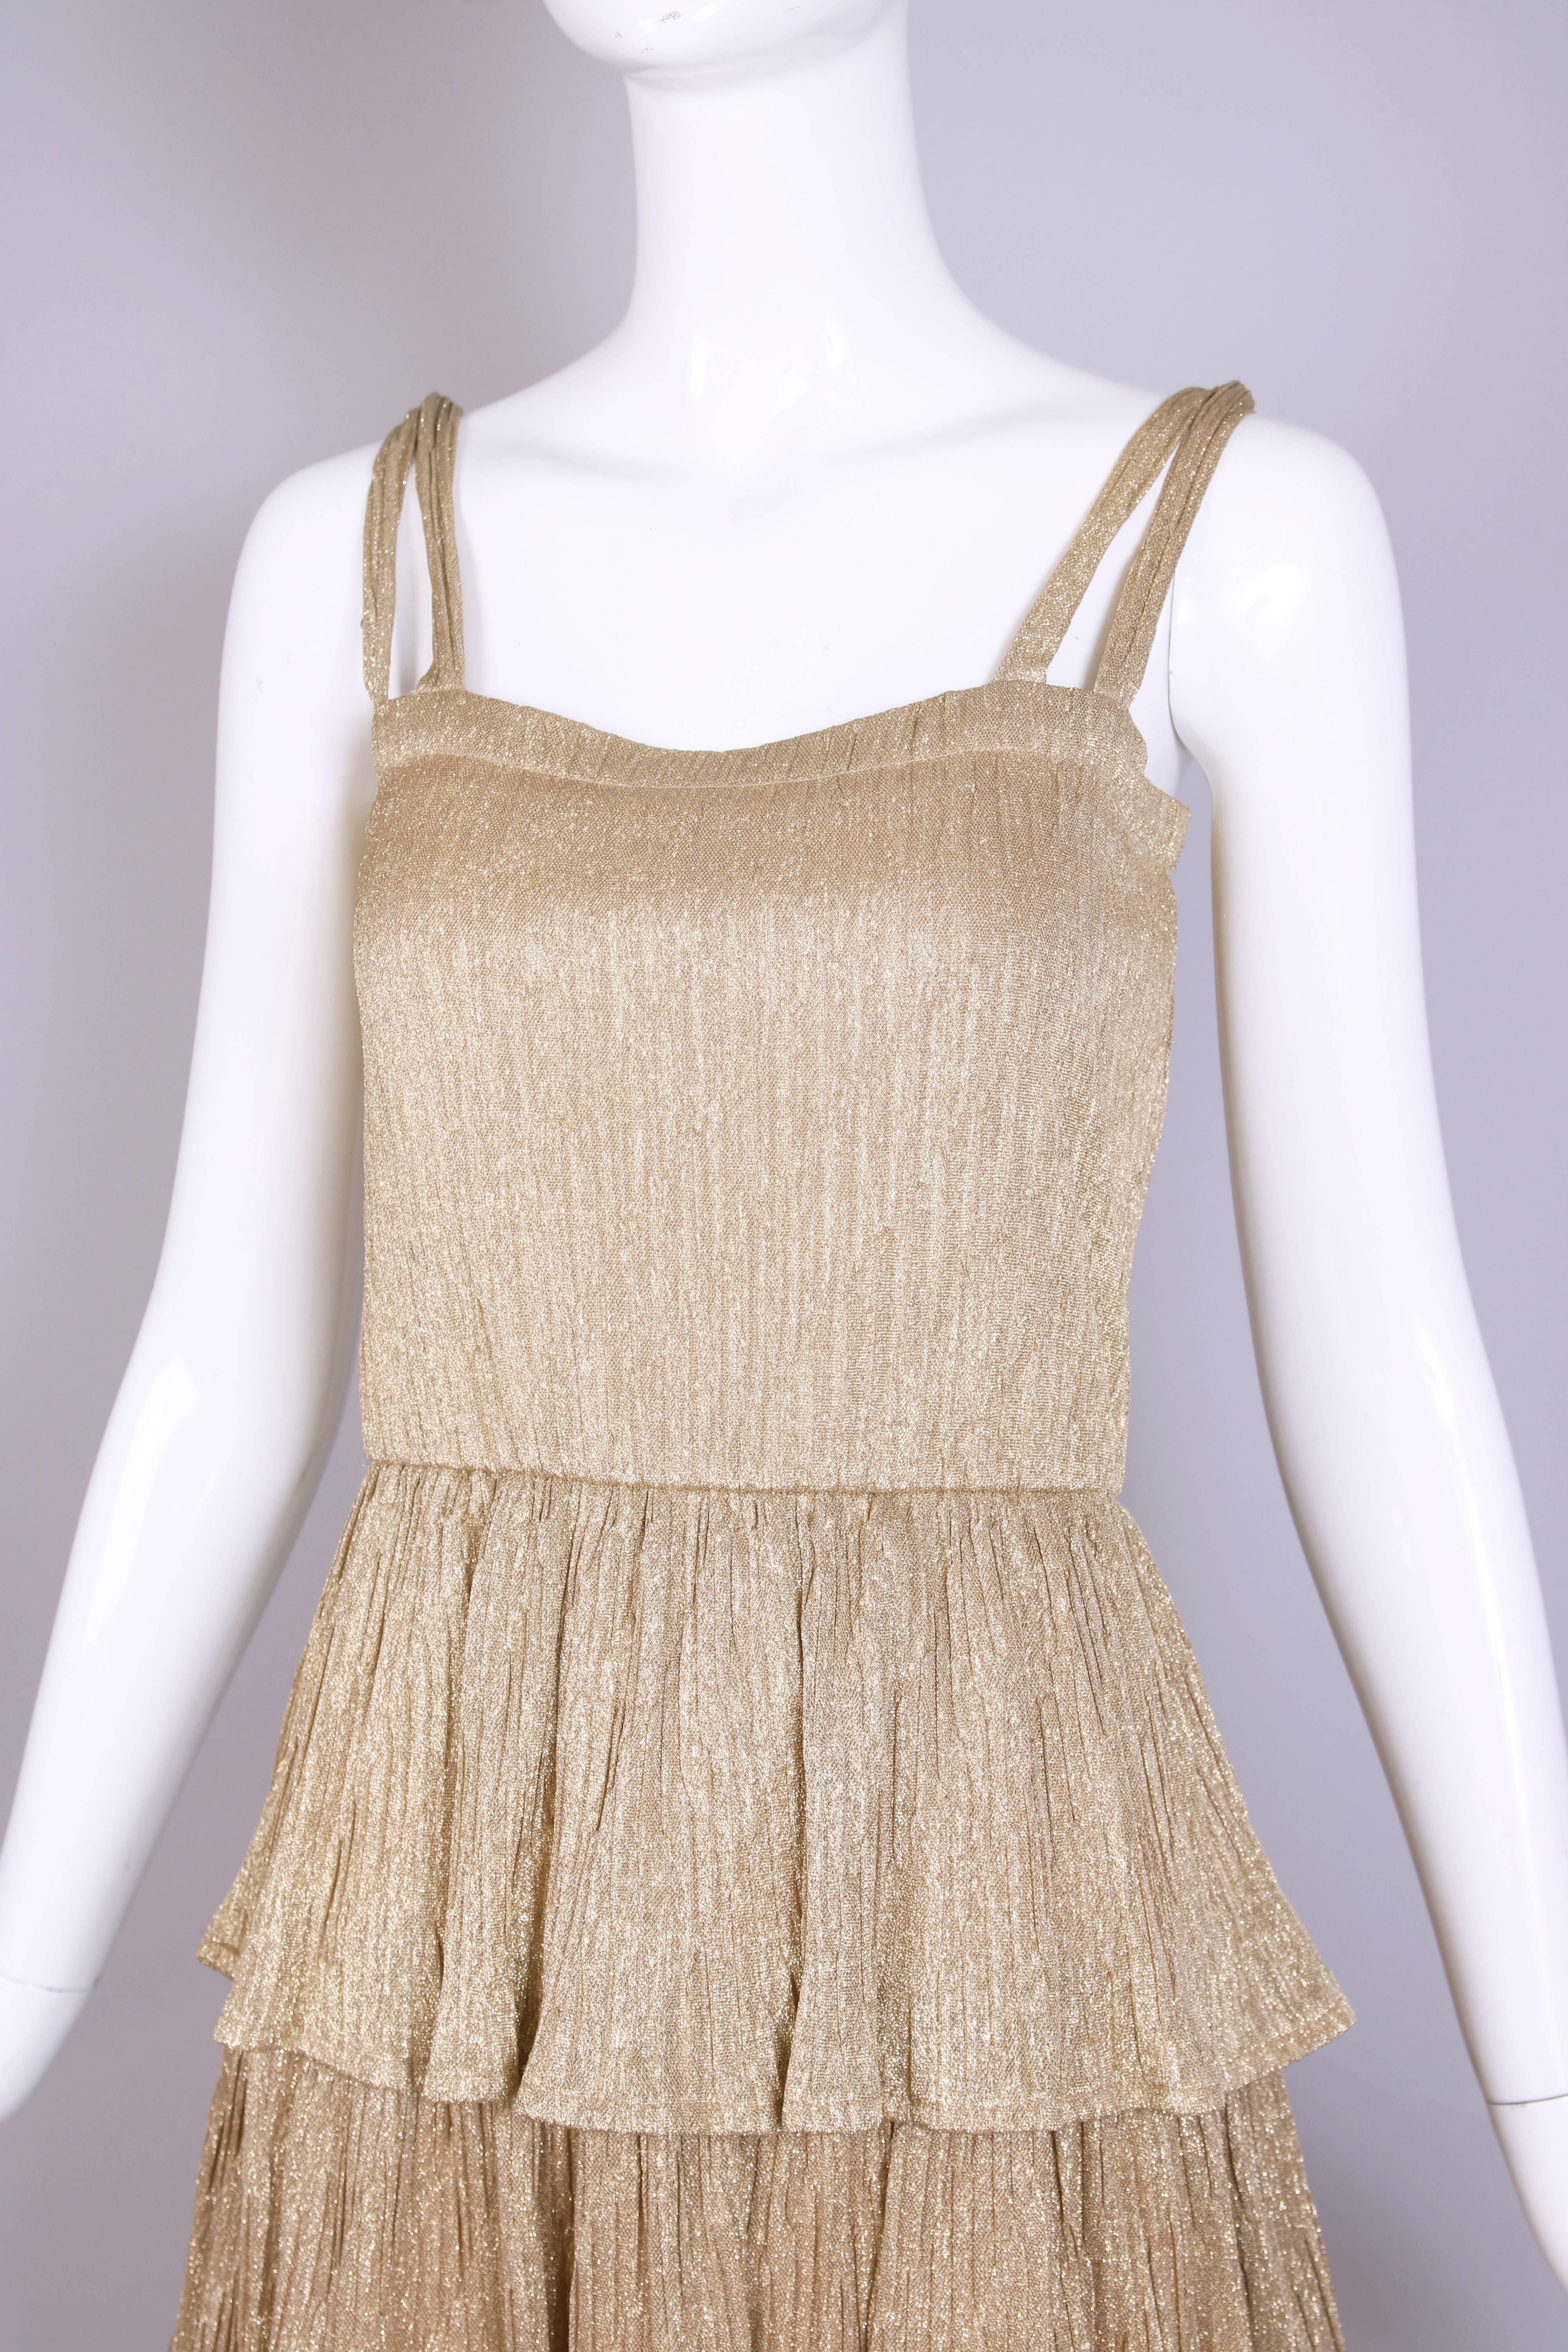 1970's Gold Lurex Multi-Tiered Pleated Party Dress In Excellent Condition For Sale In Studio City, CA